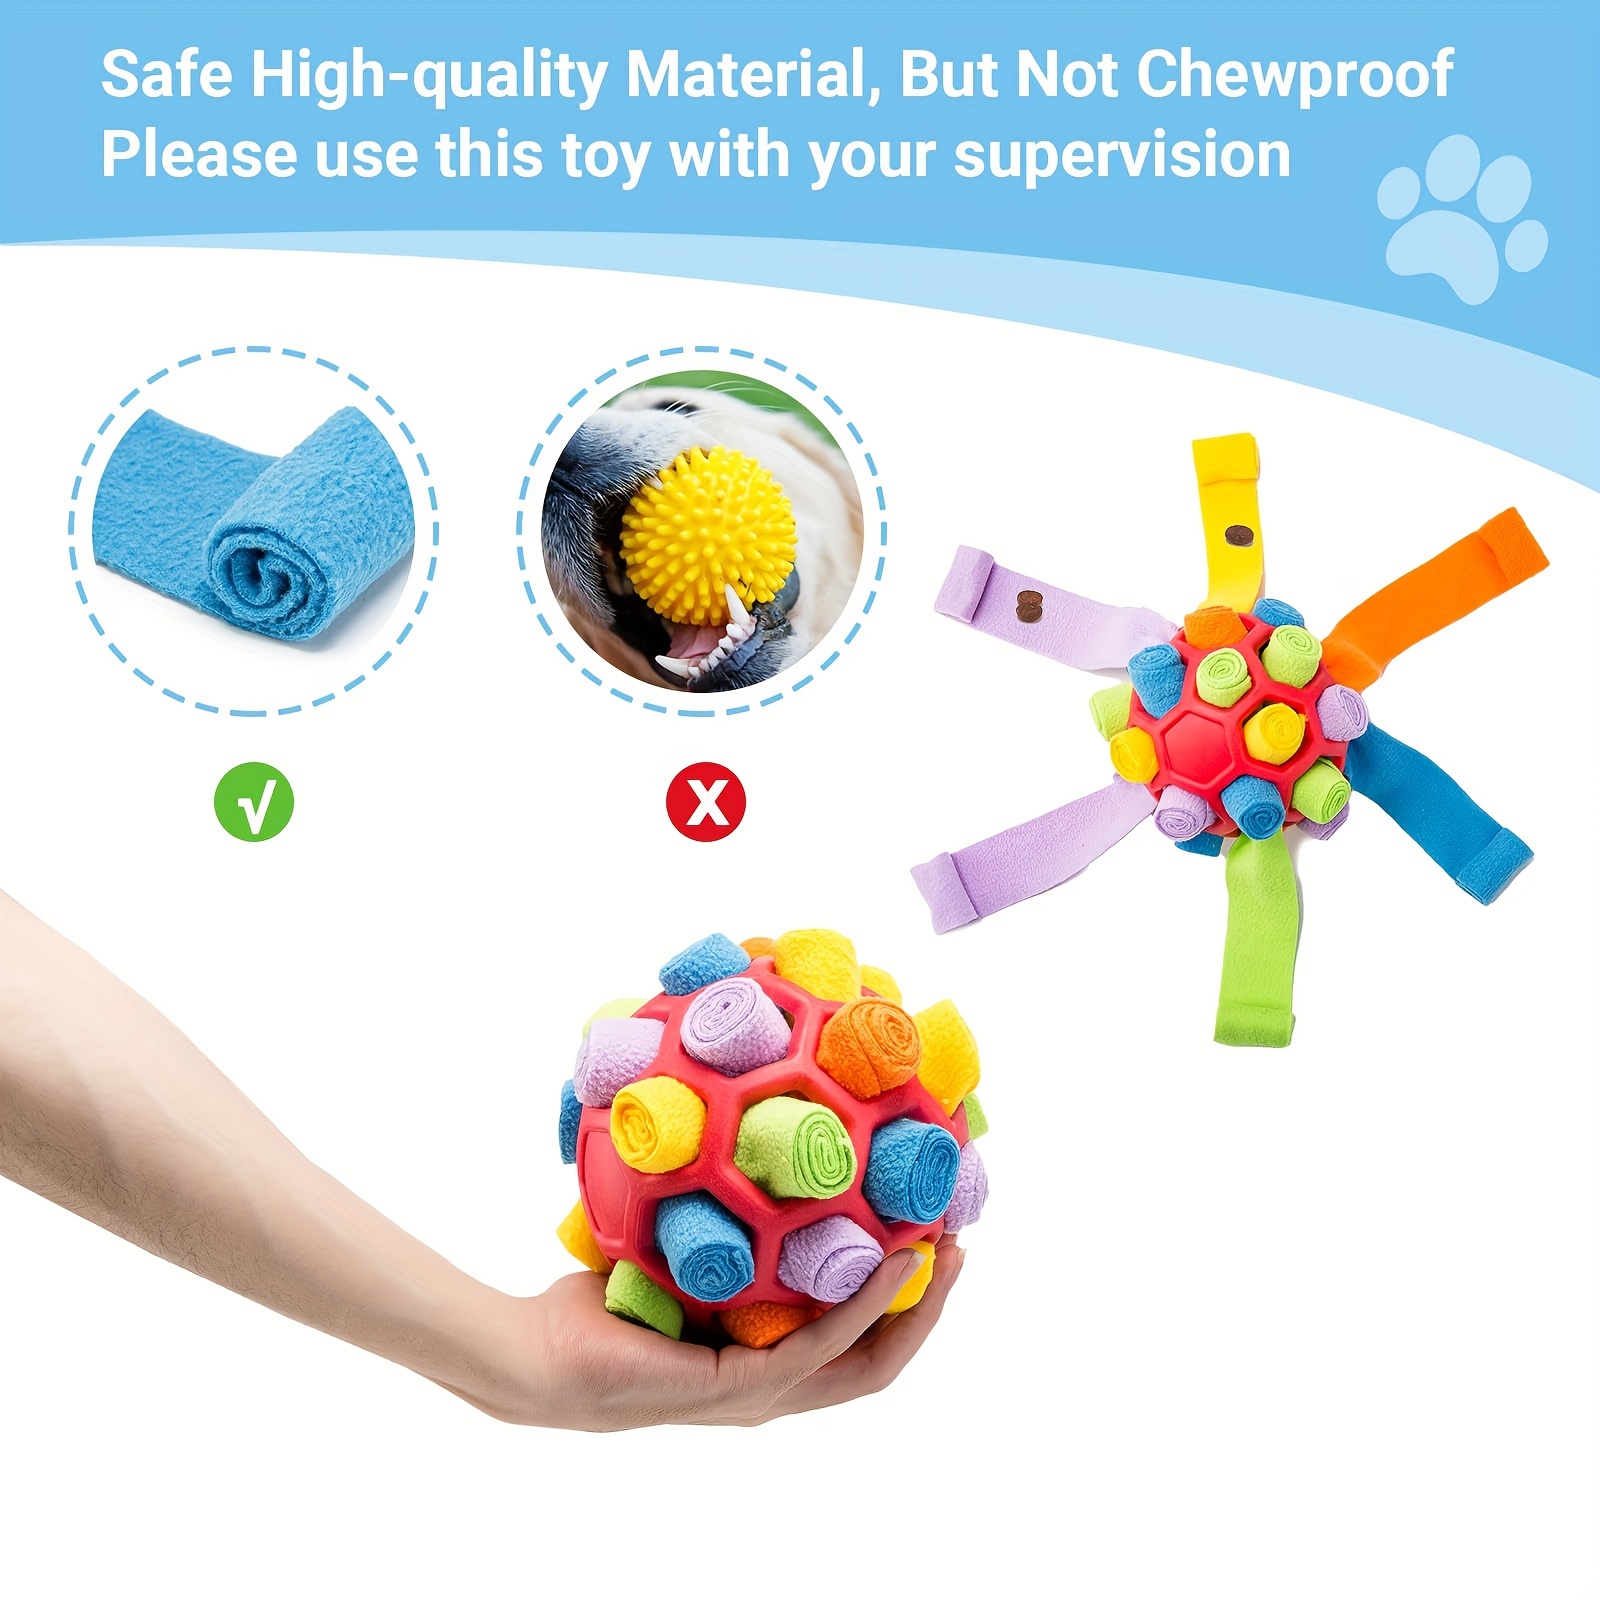 Larimuer Pet Snuffle Ball, Puzzle Sniffing Interactive Dog Ball for Blind  Dogs Training Stress Relief Dog Enrichment Toys Treat Ball Machine Washable